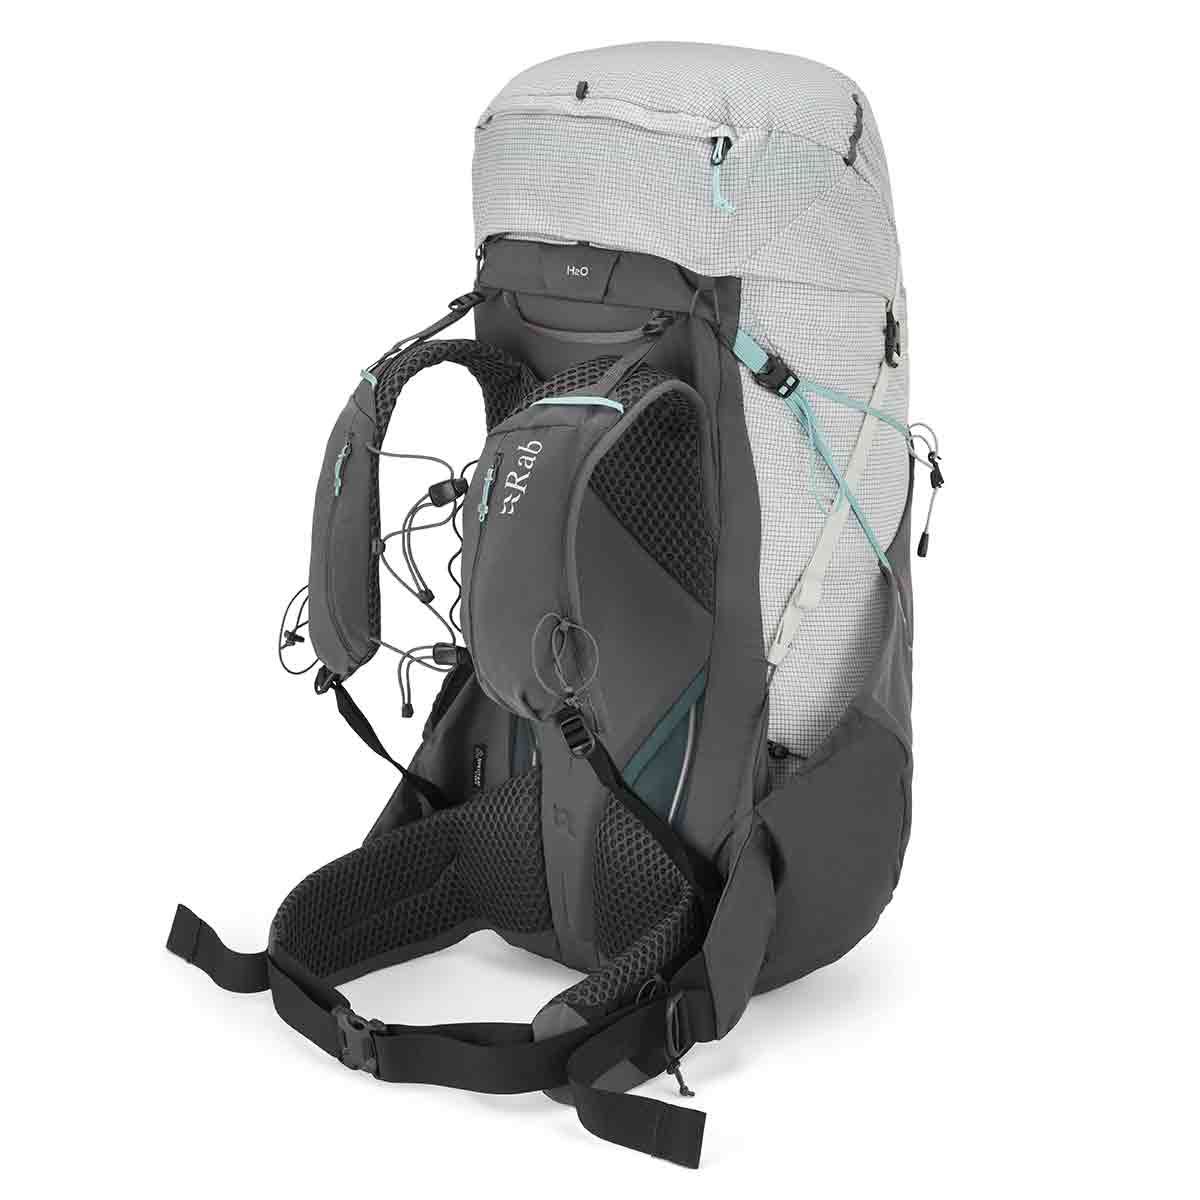 Rab Muon ND 50 backpacking backpack - Women